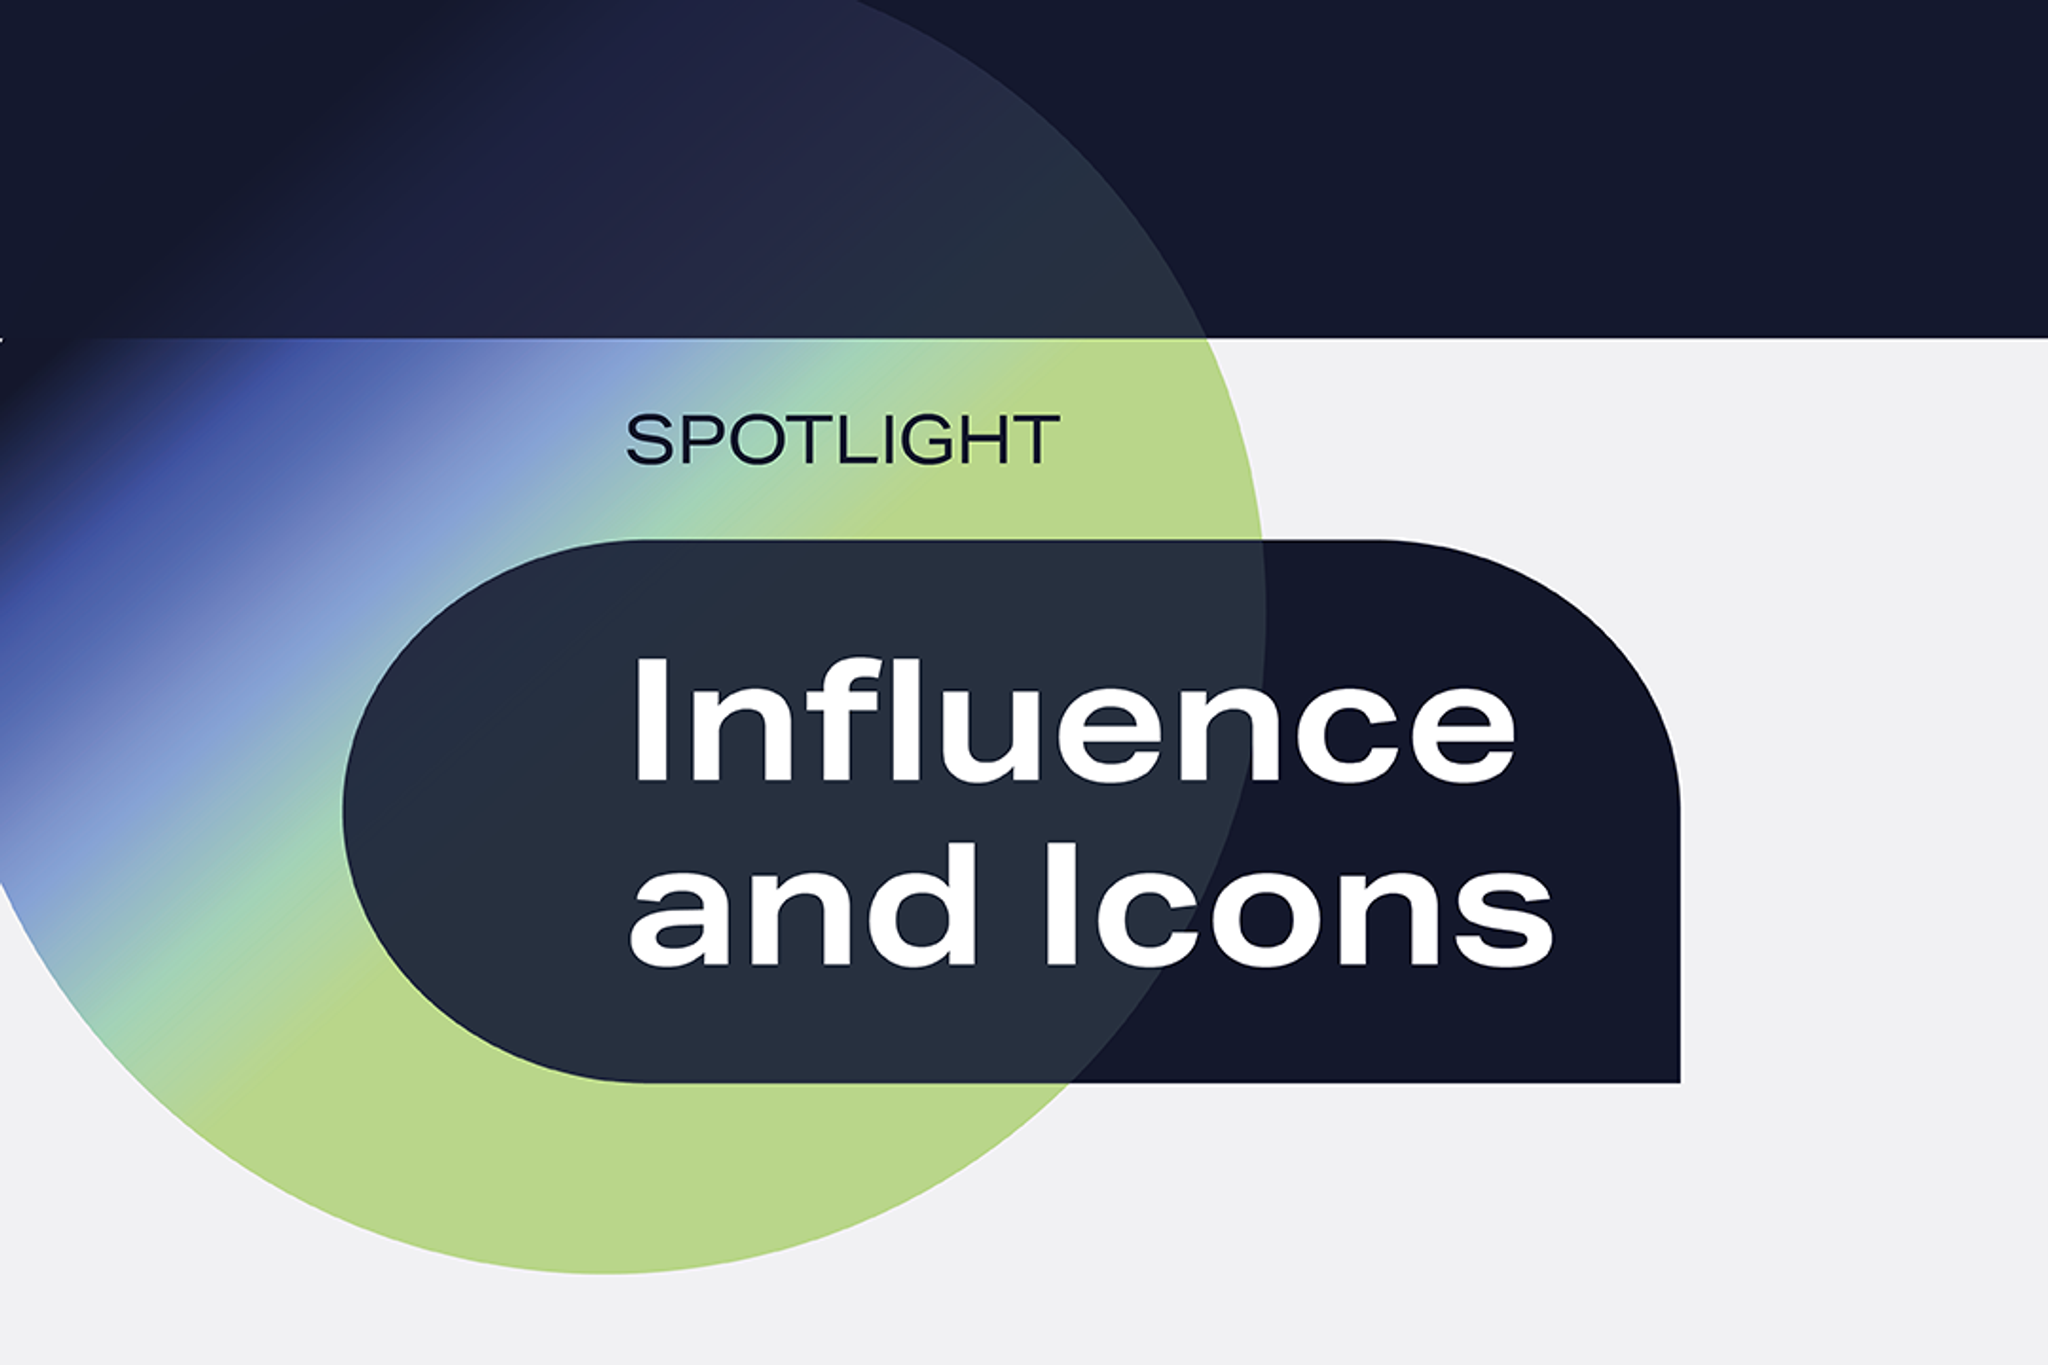 Icons and Influence